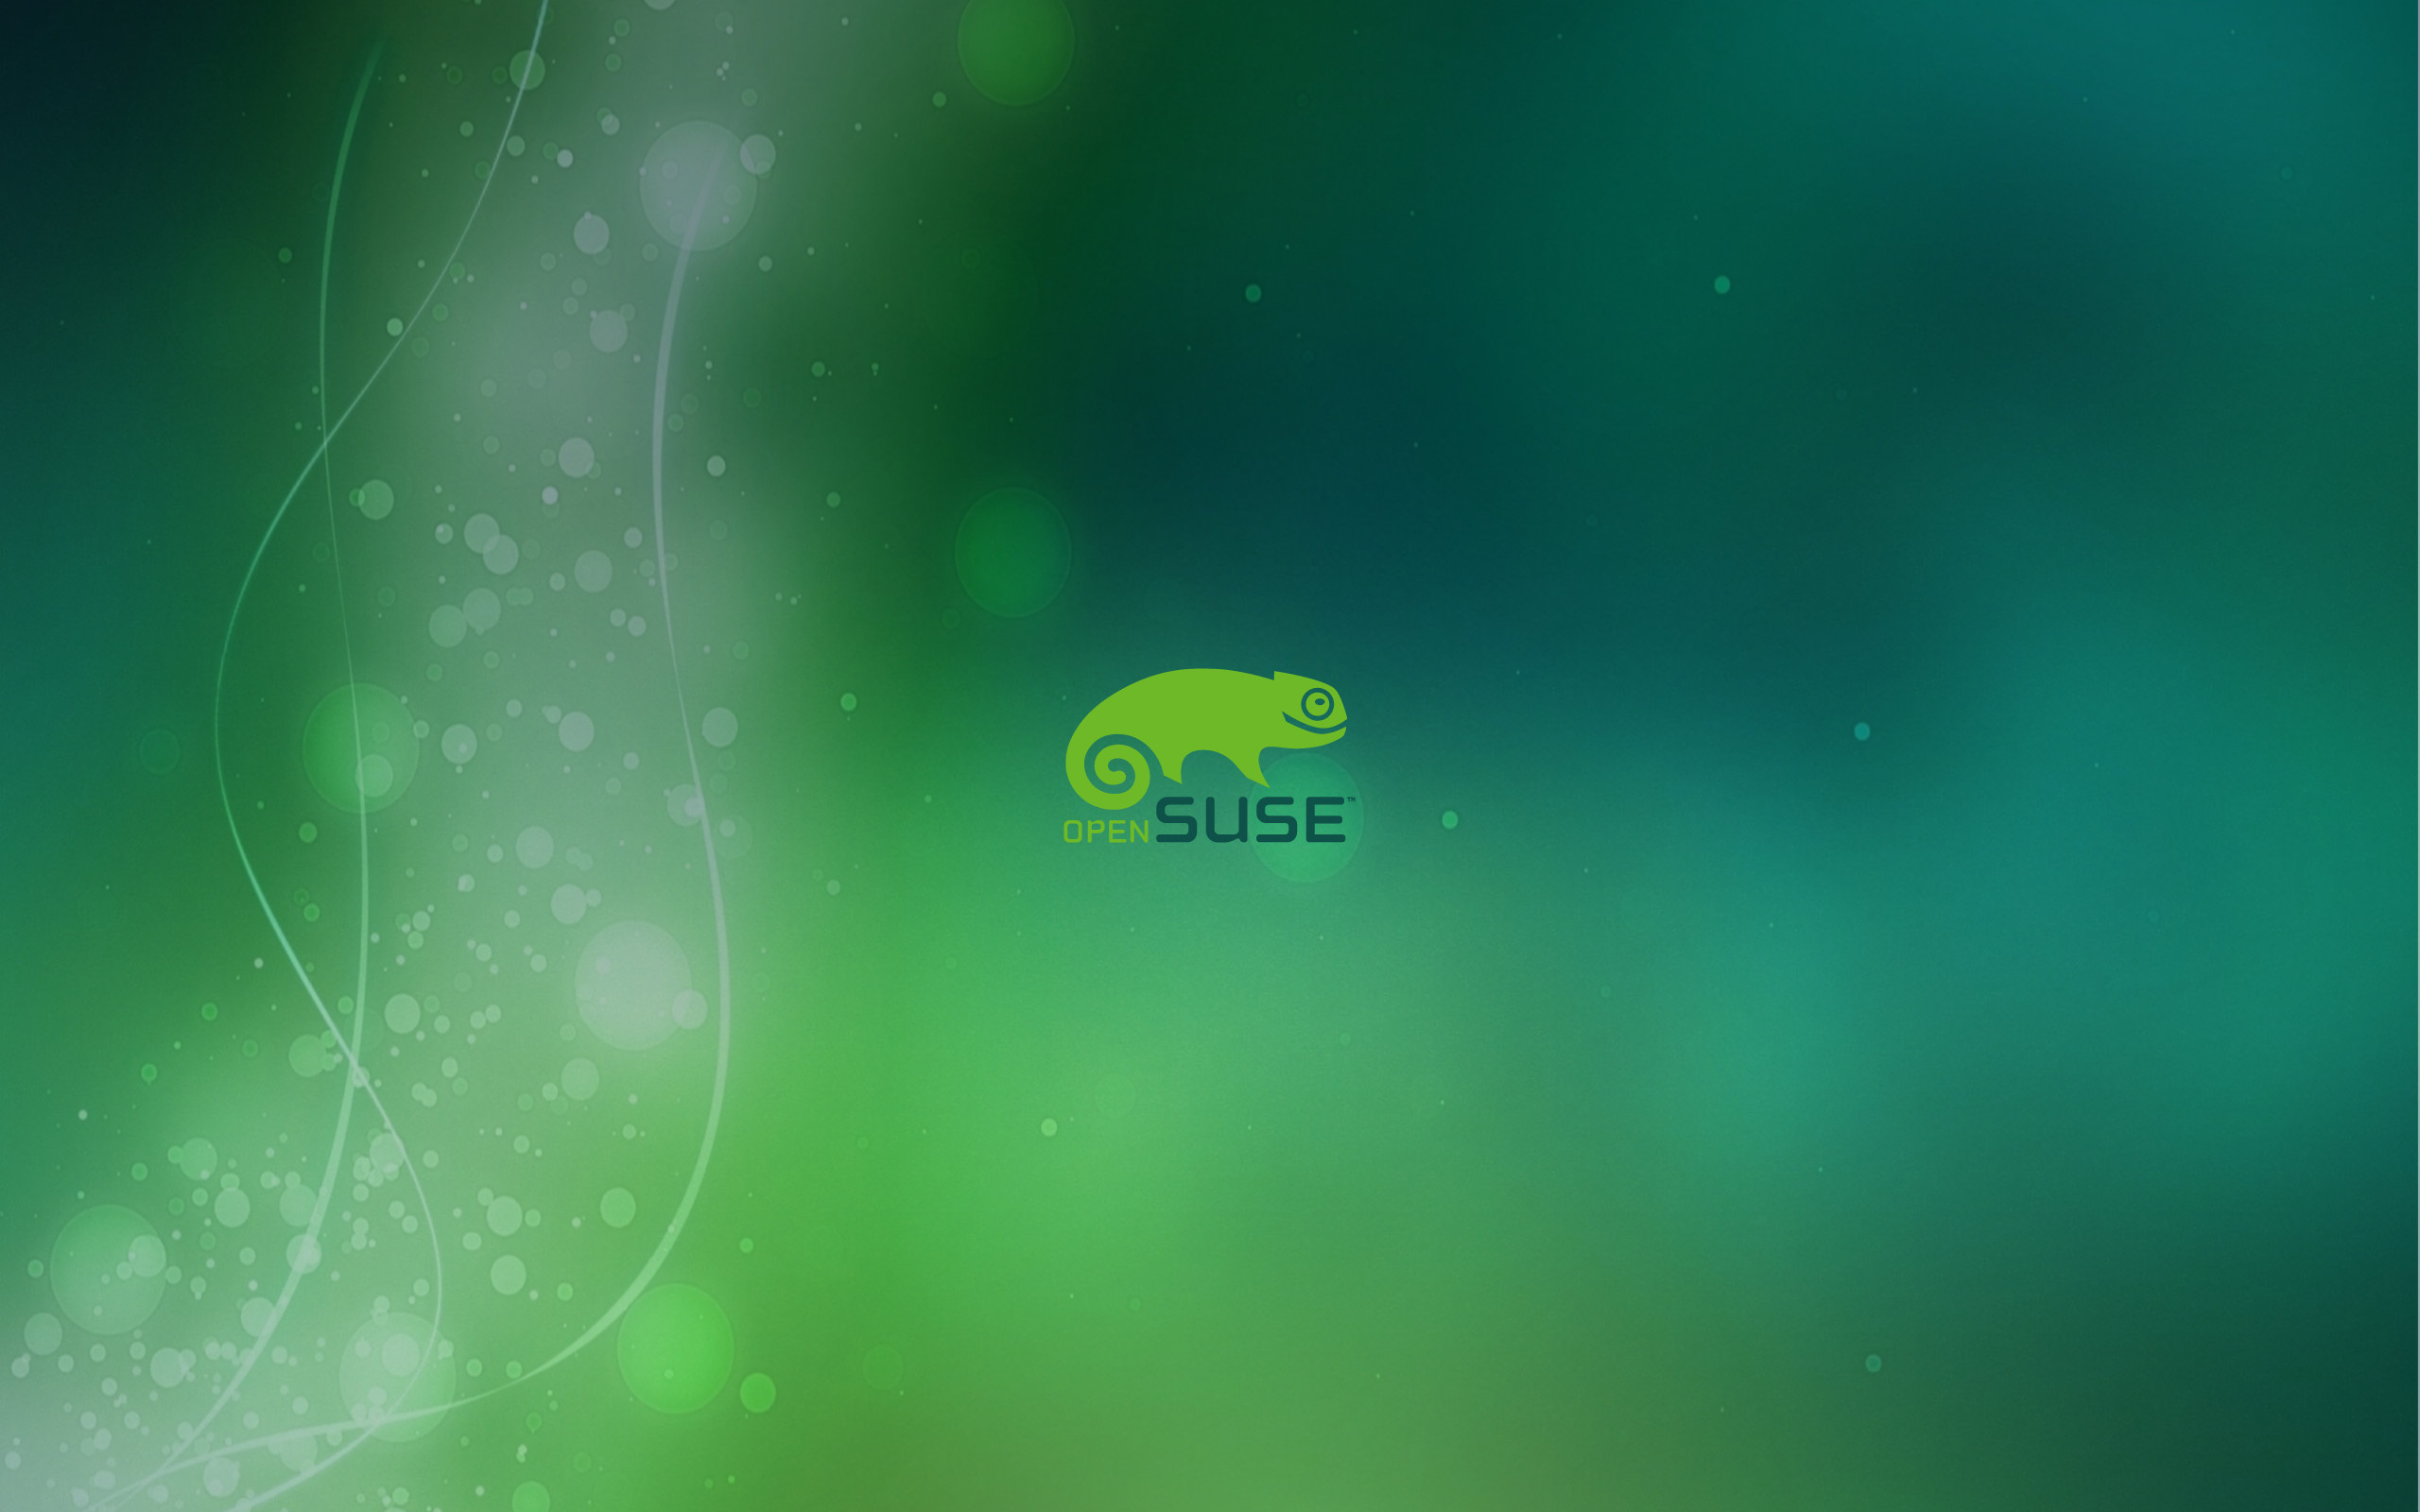 Opensuse Wallpaper Gallery